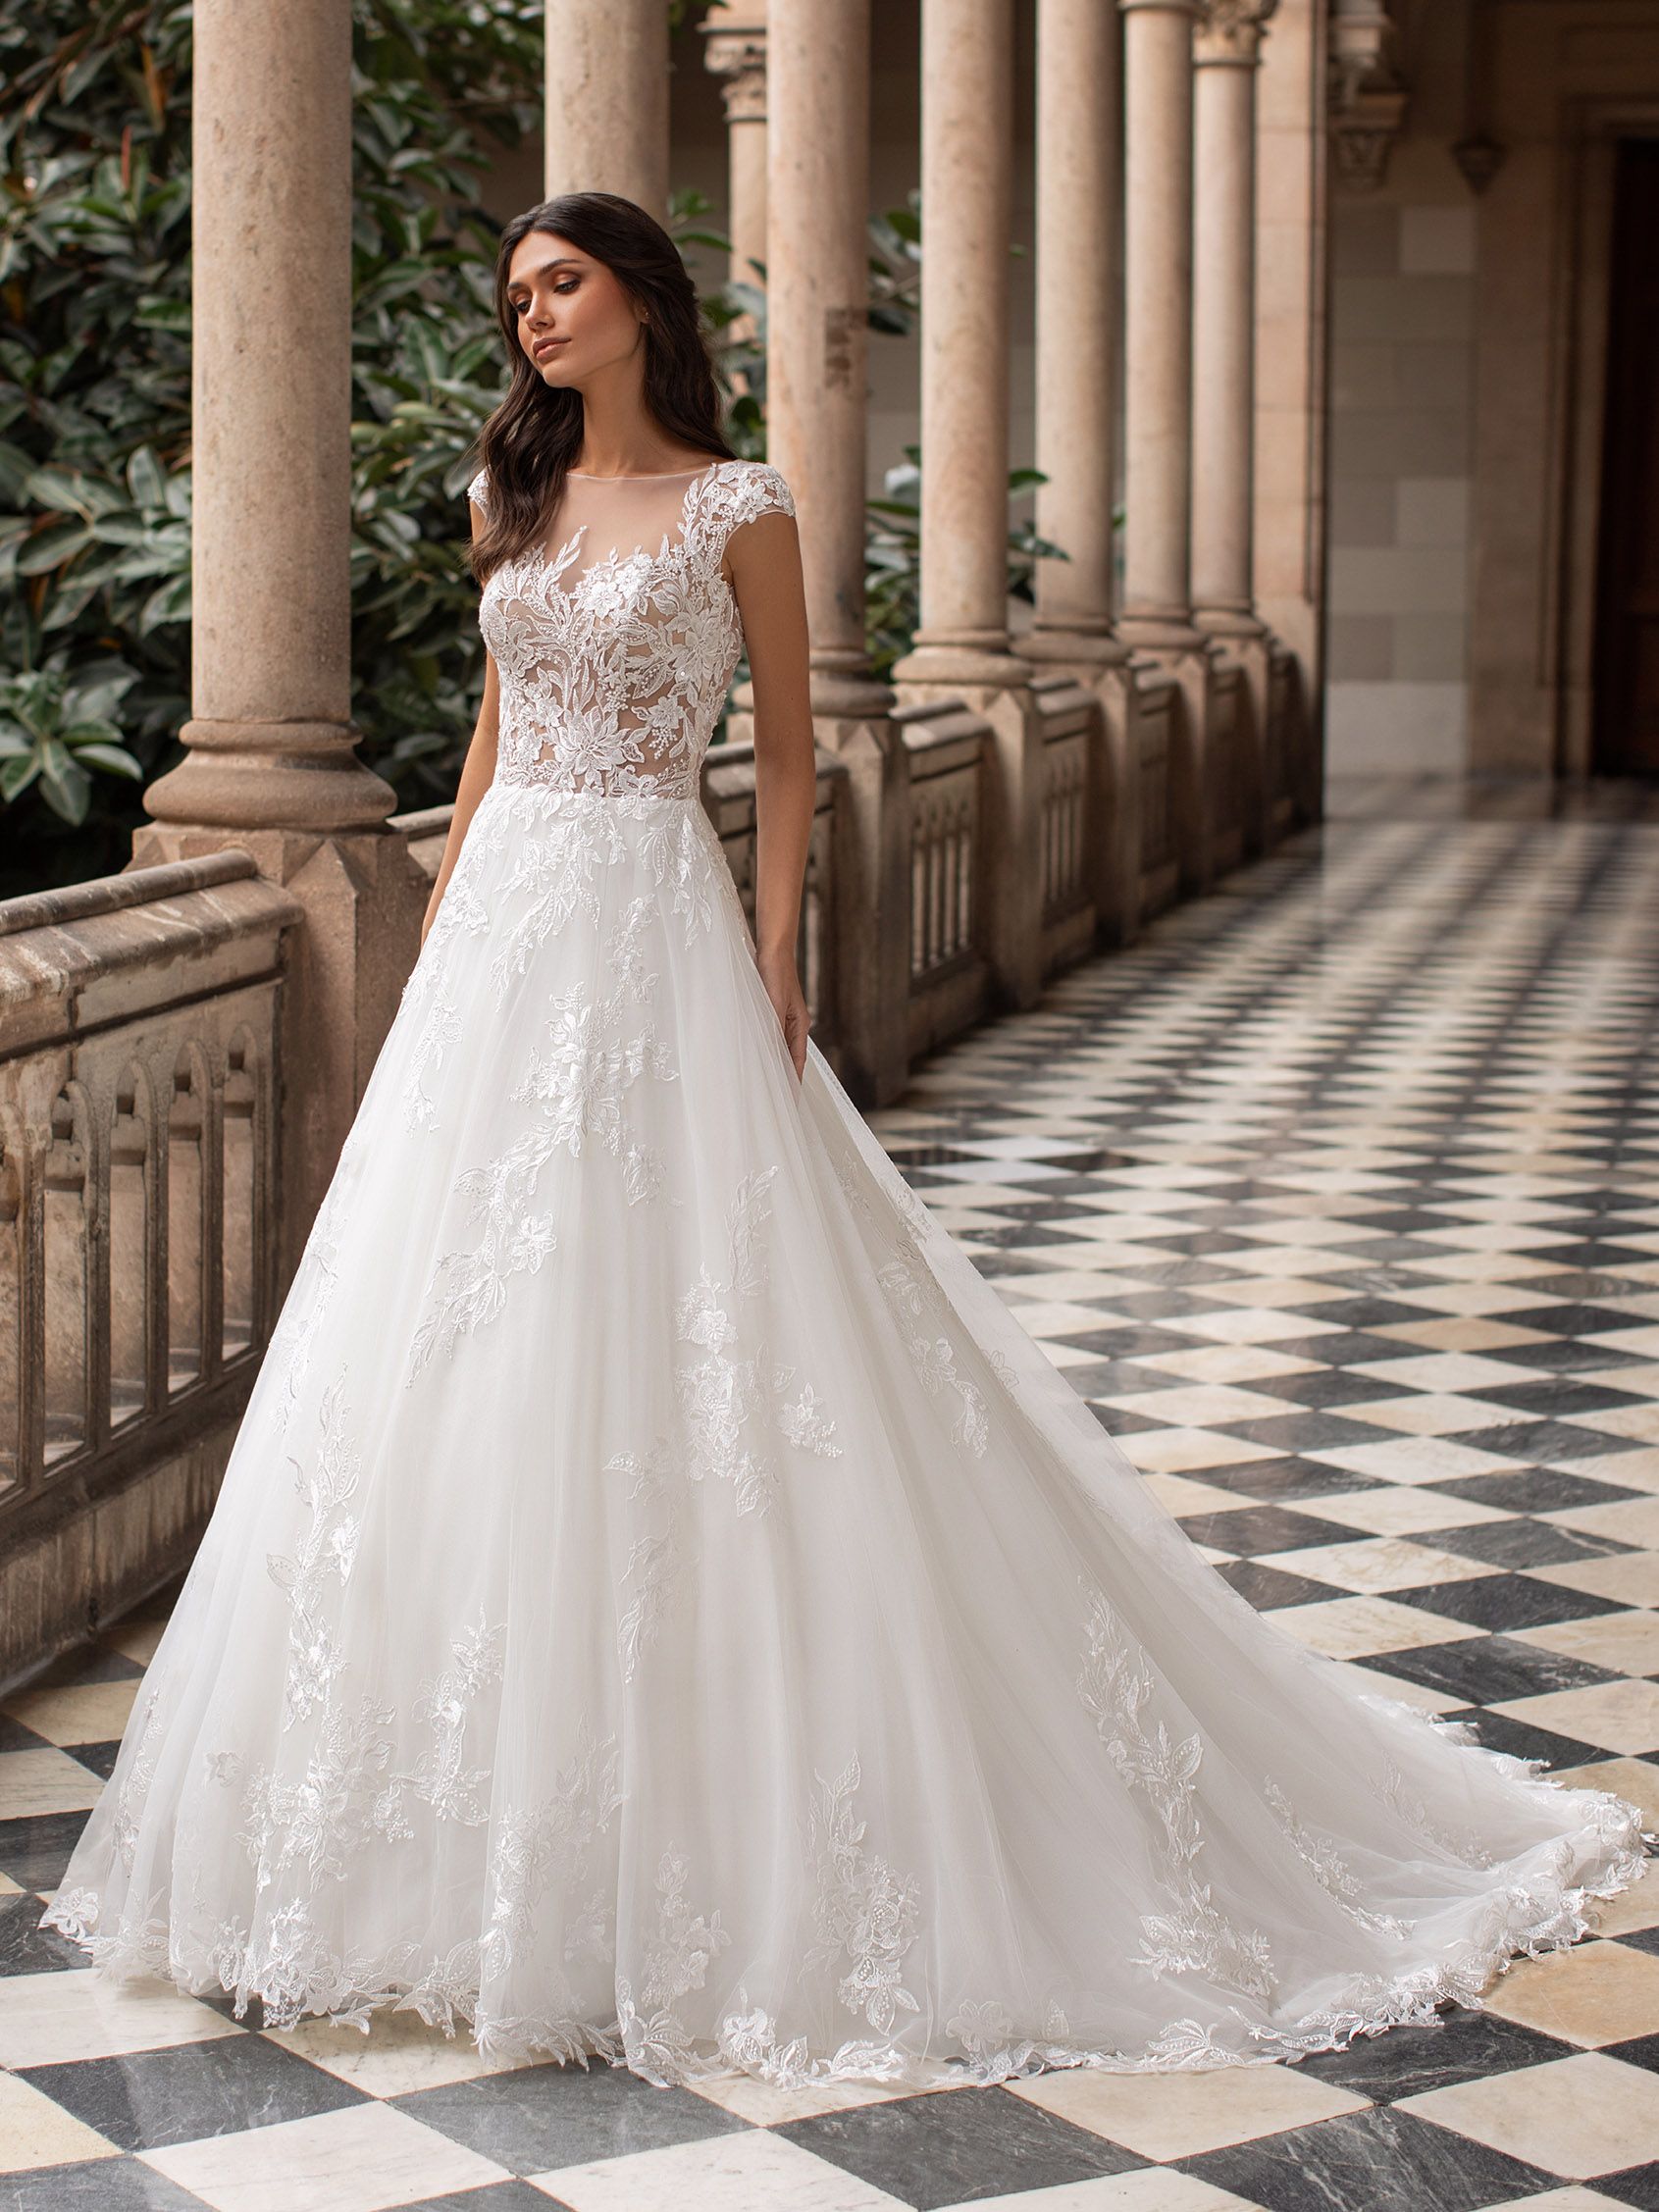 What Type Of Wedding Dresses Are Timeless?